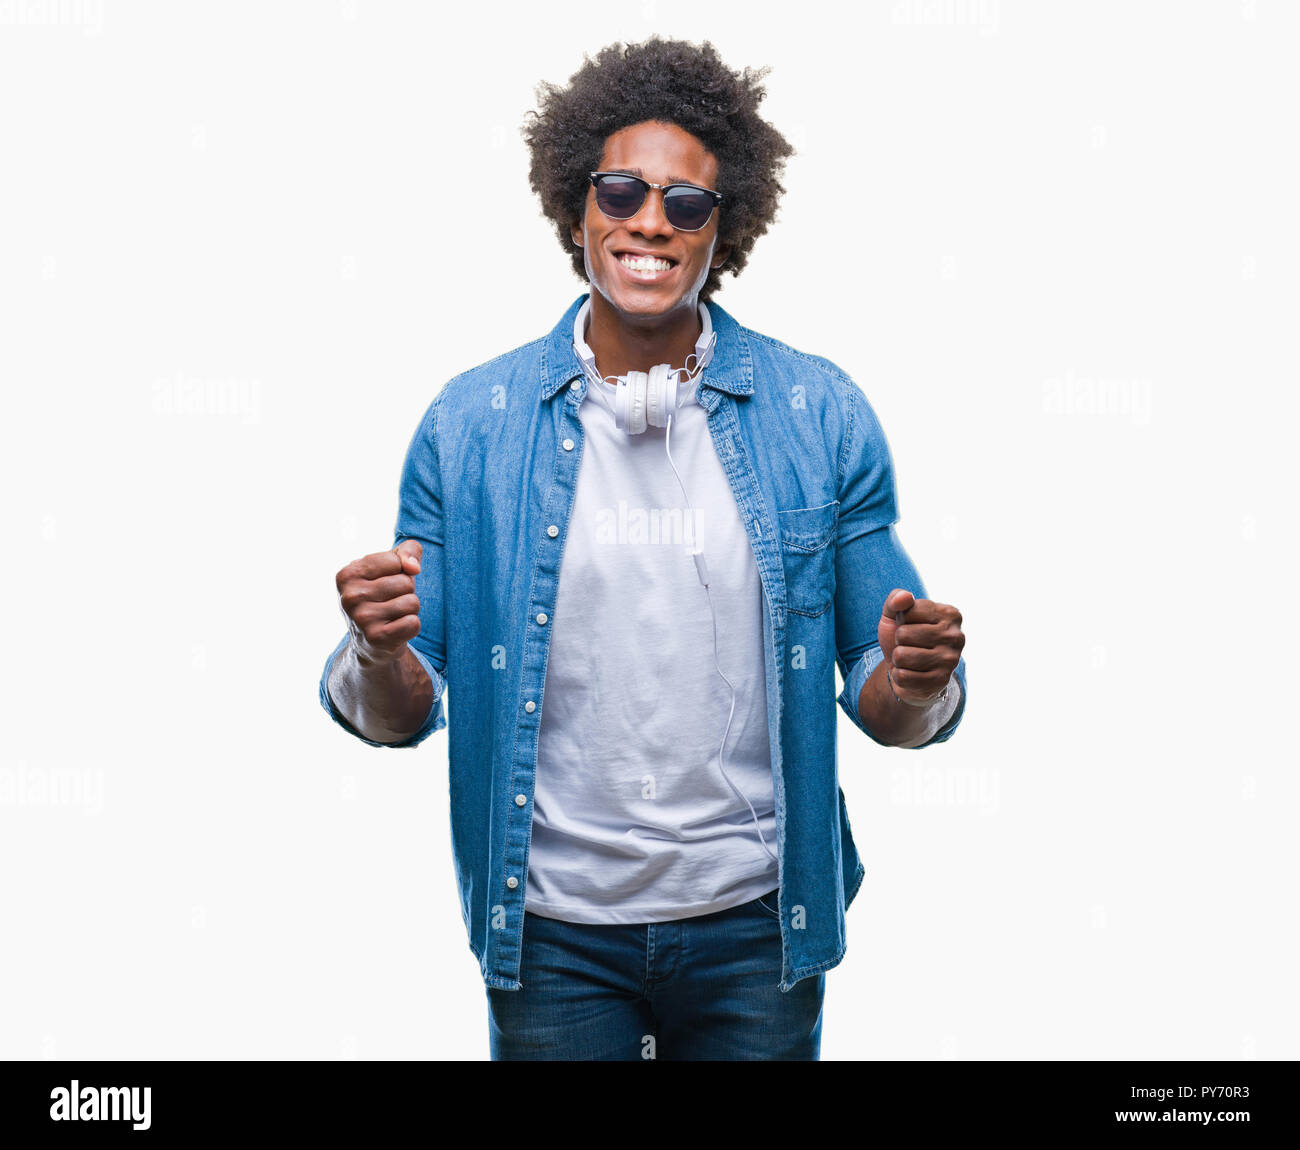 Afro american man wearing headphones listening to music over isolated background very happy and excited doing winner gesture with arms raised, smiling Stock Photo